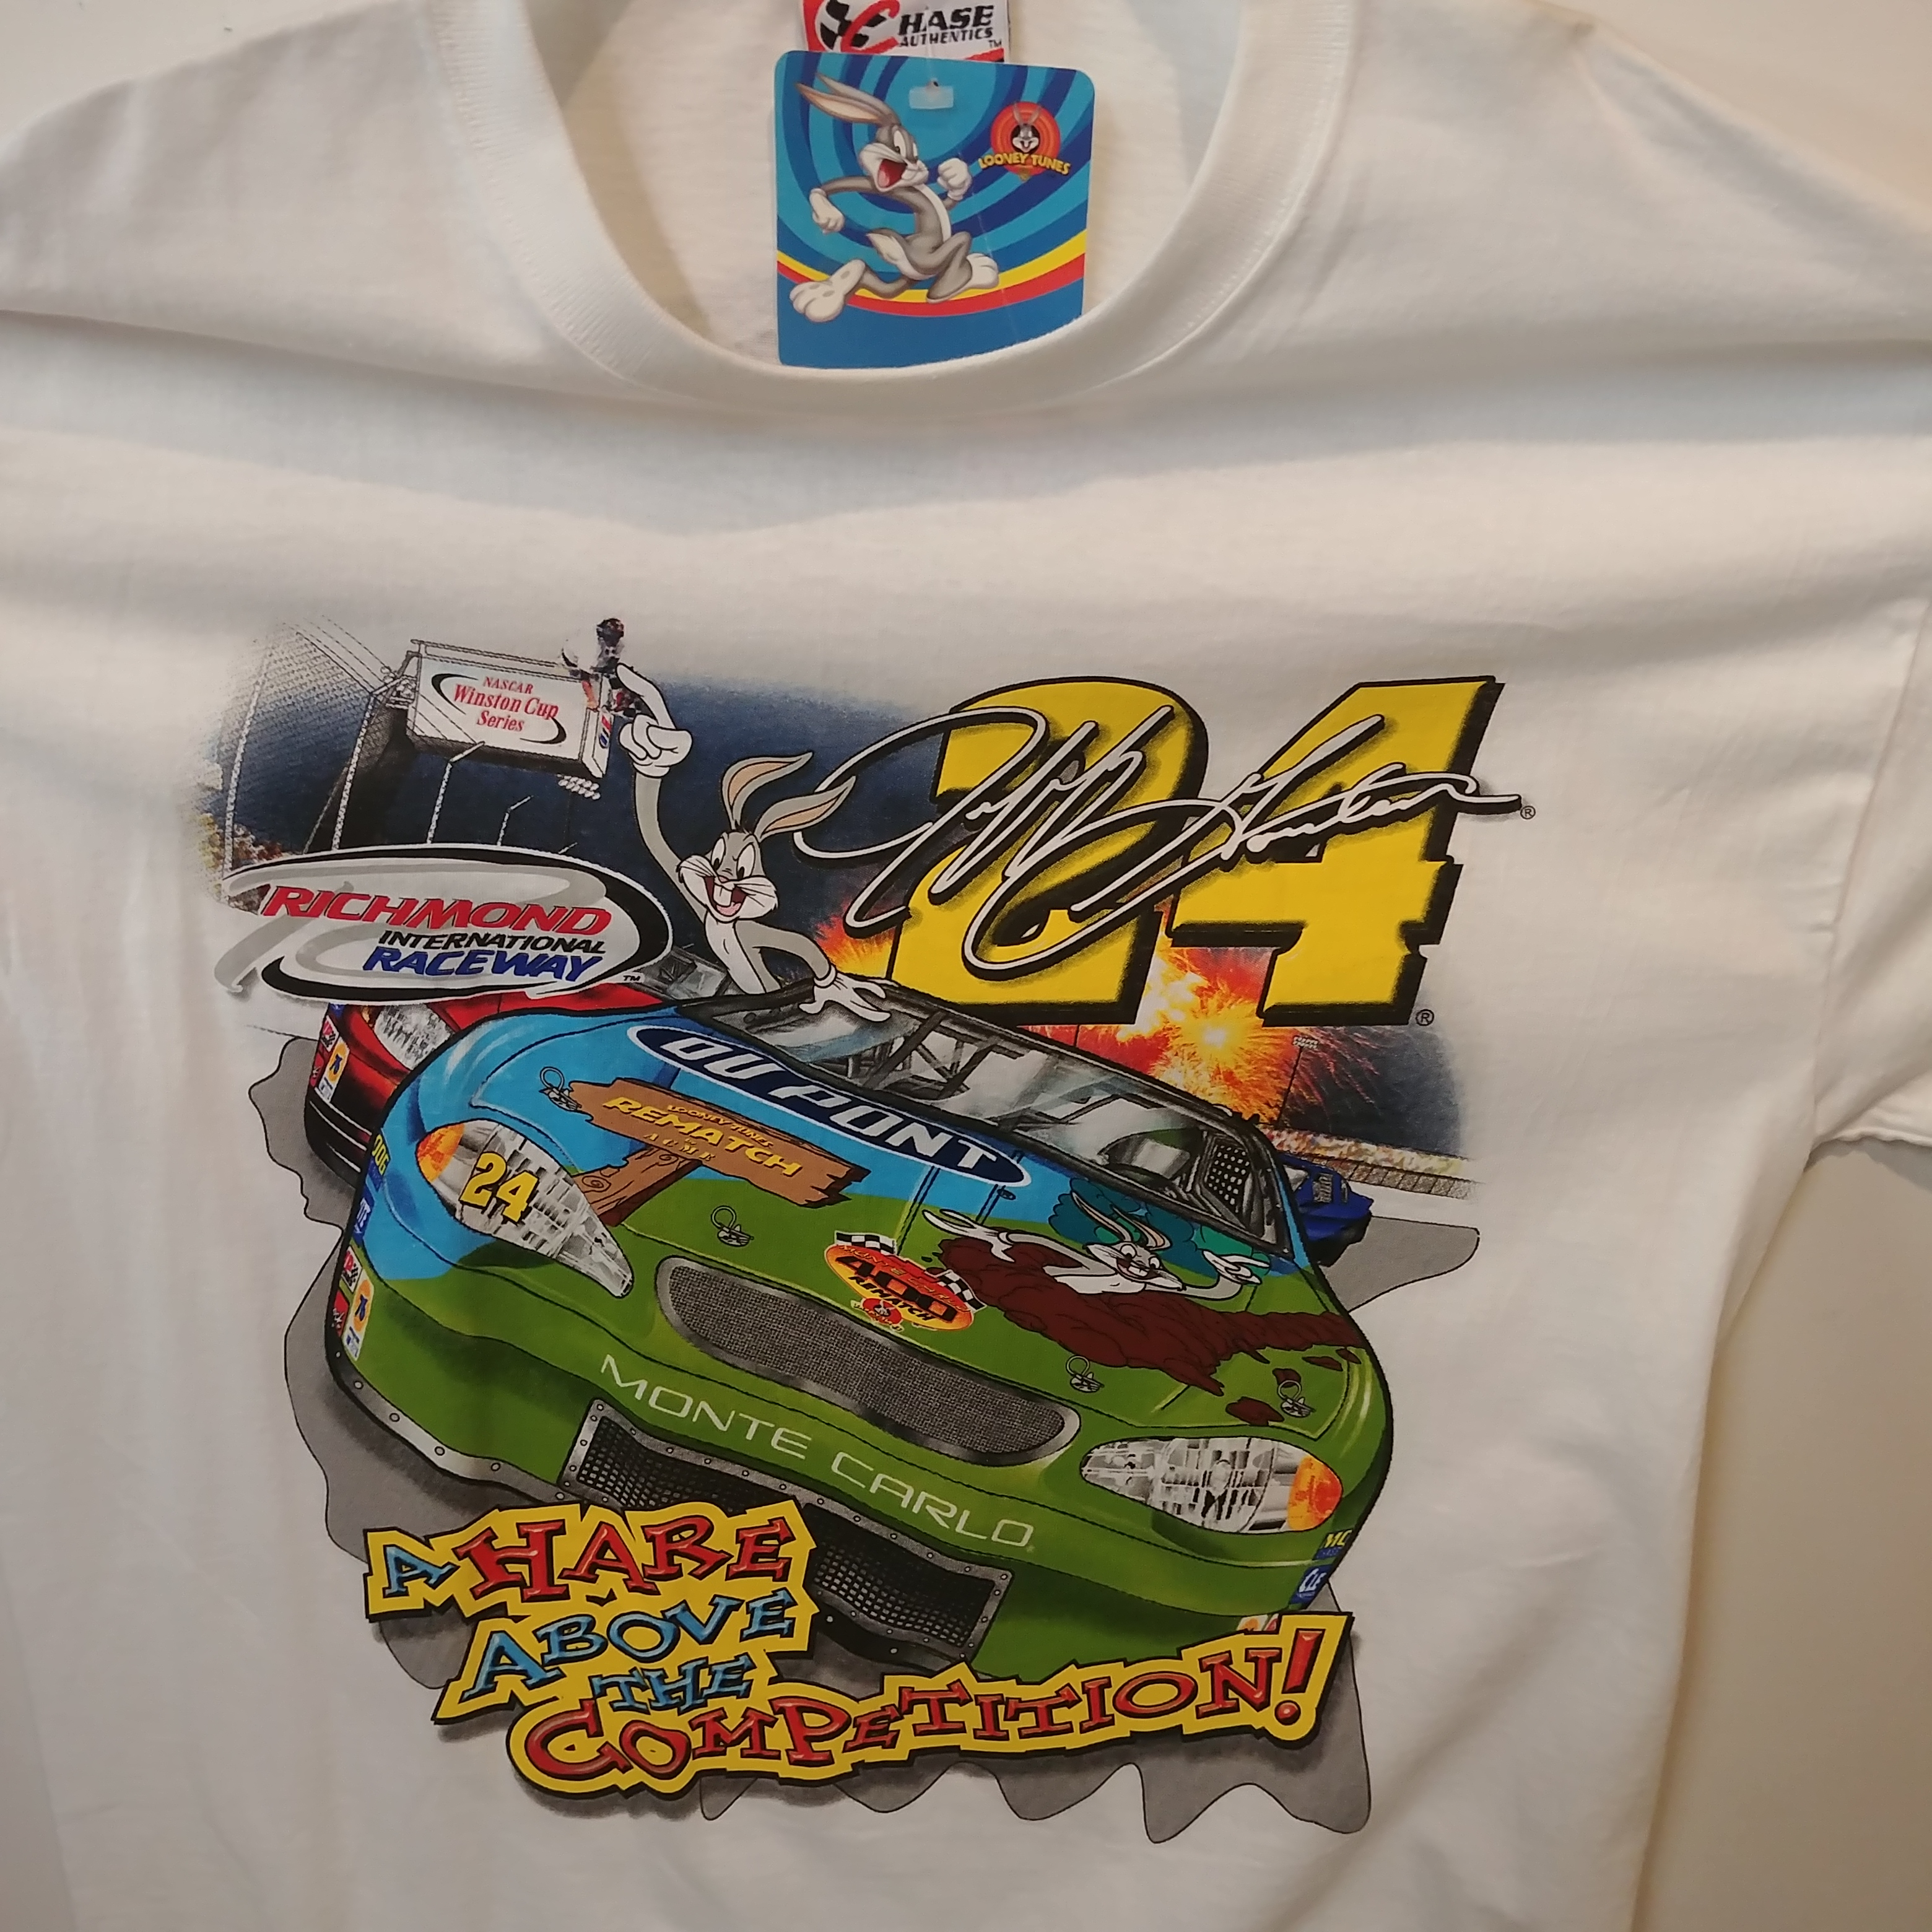 2002 Jeff Gordon Dupont "Hare Above the Competition" tee